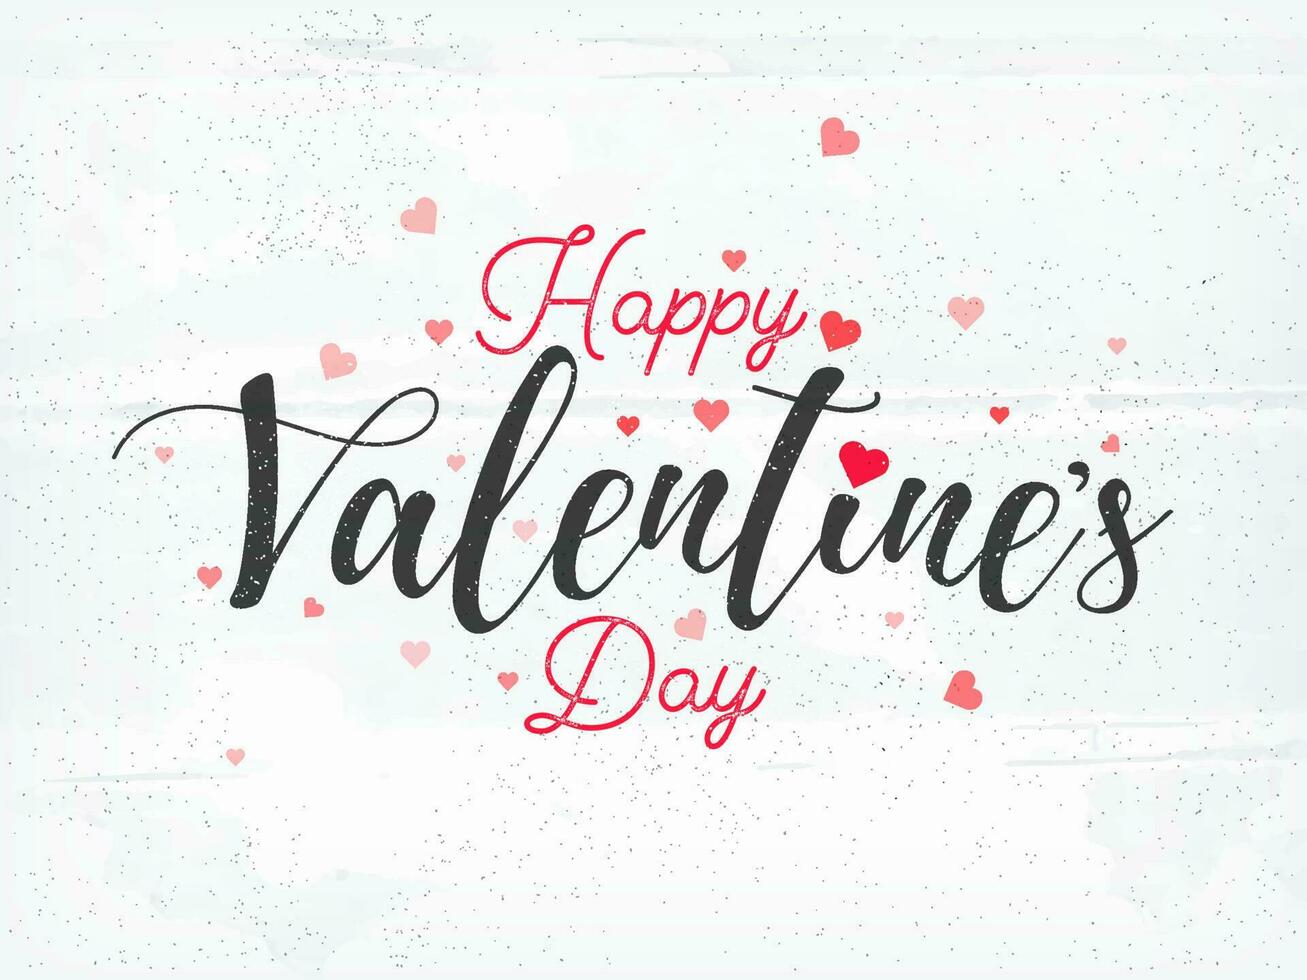 Happy Valentine's Day Font Decorated with Tiny Hearts on White Texture Background. vector